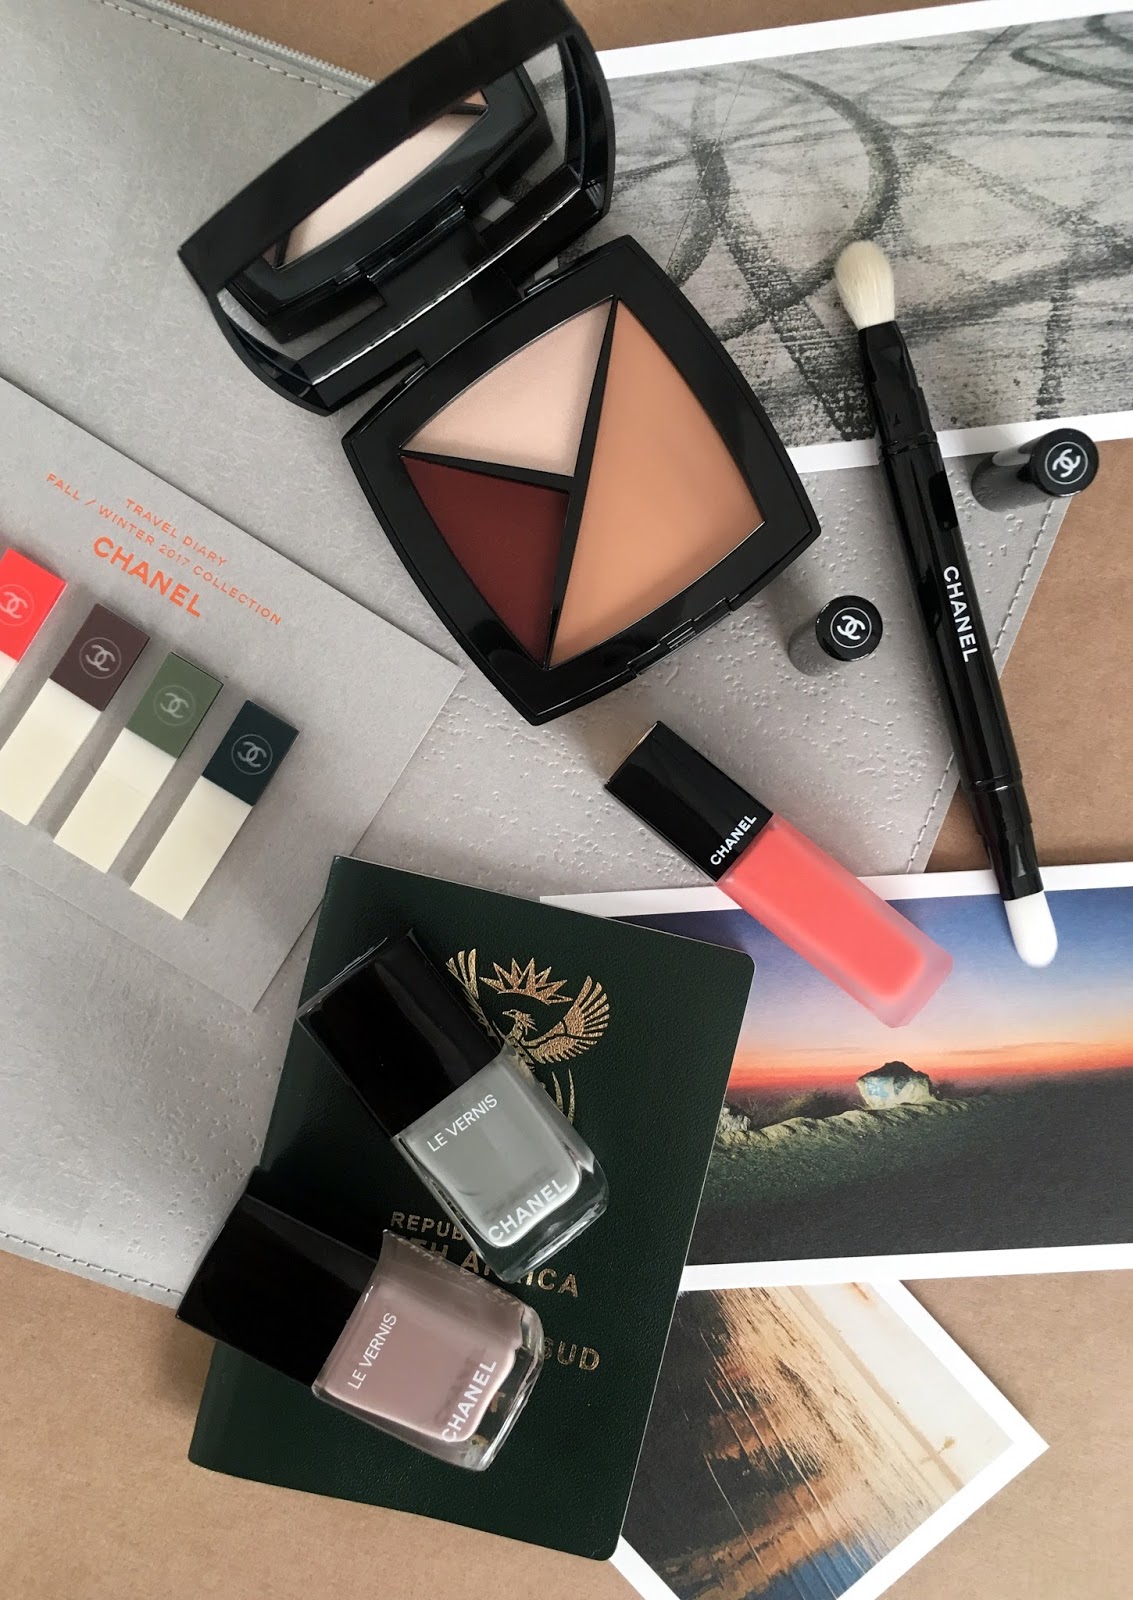 CHANEL- TRAVEL DIARY EYE MAKEUP PRODUCTS